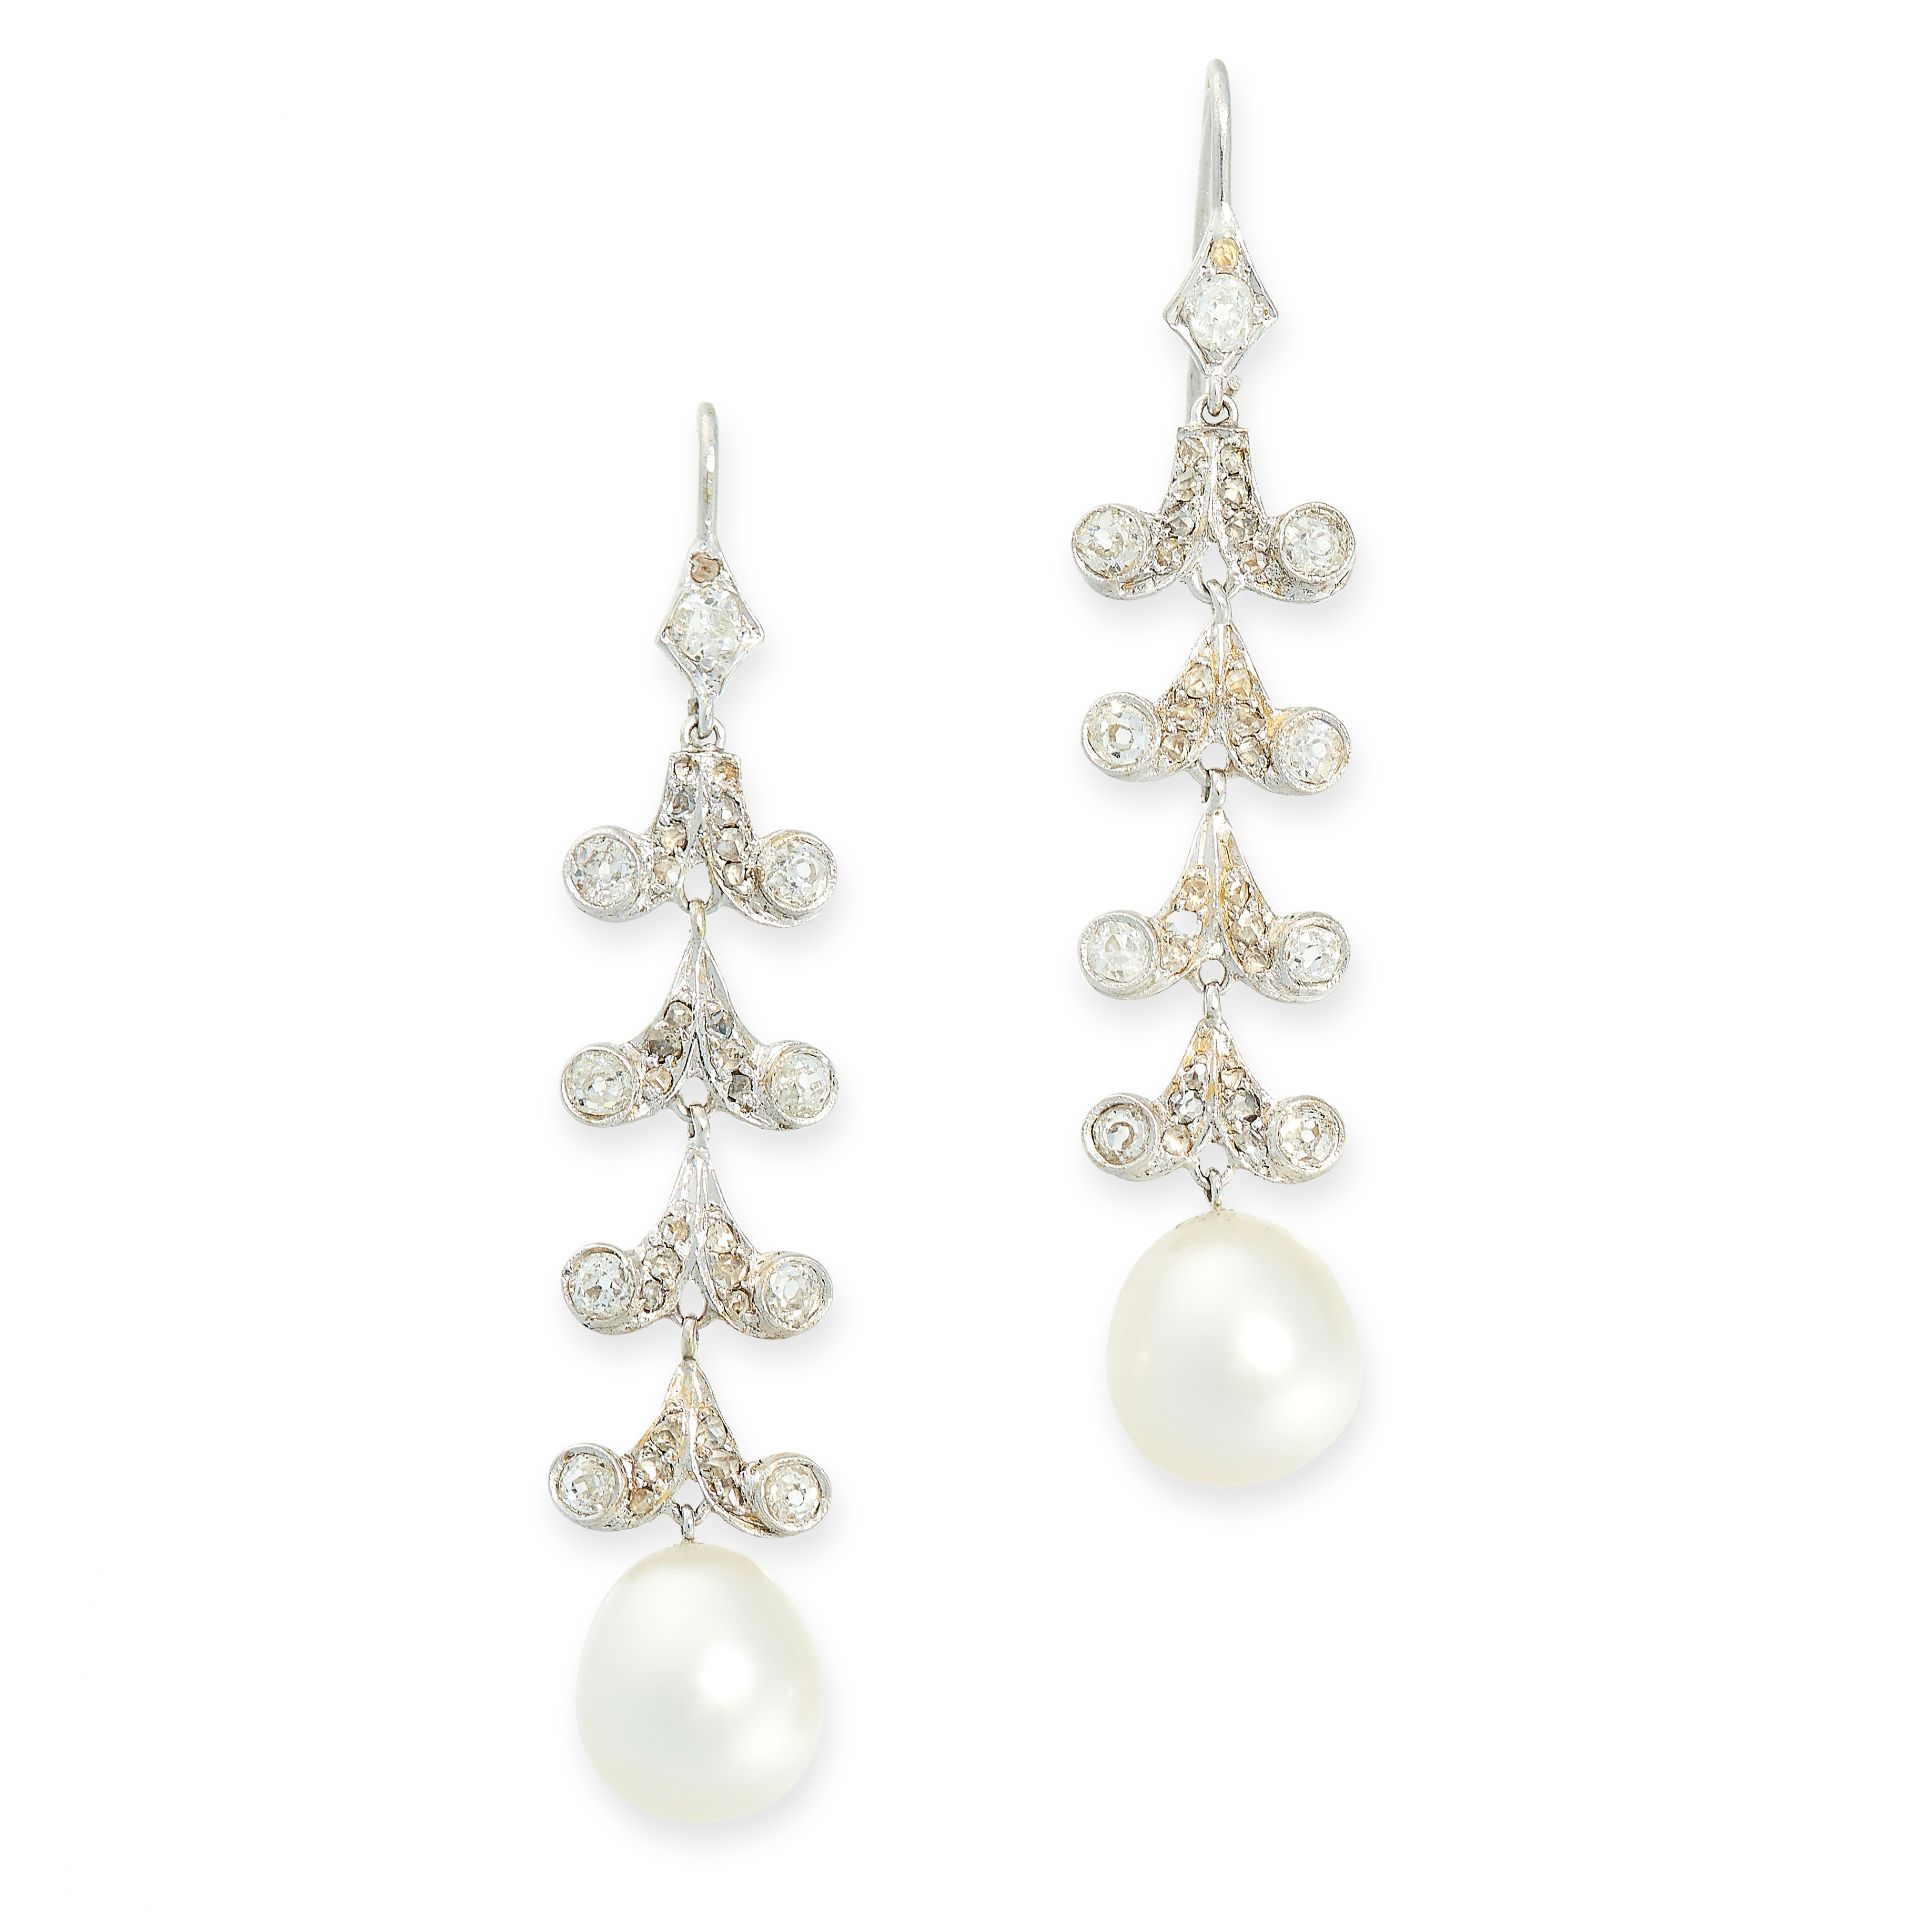 PAIR OF PEARL AND DIAMOND EARRINGS each set with a pearl of 11.5mm, below scrolling links set with